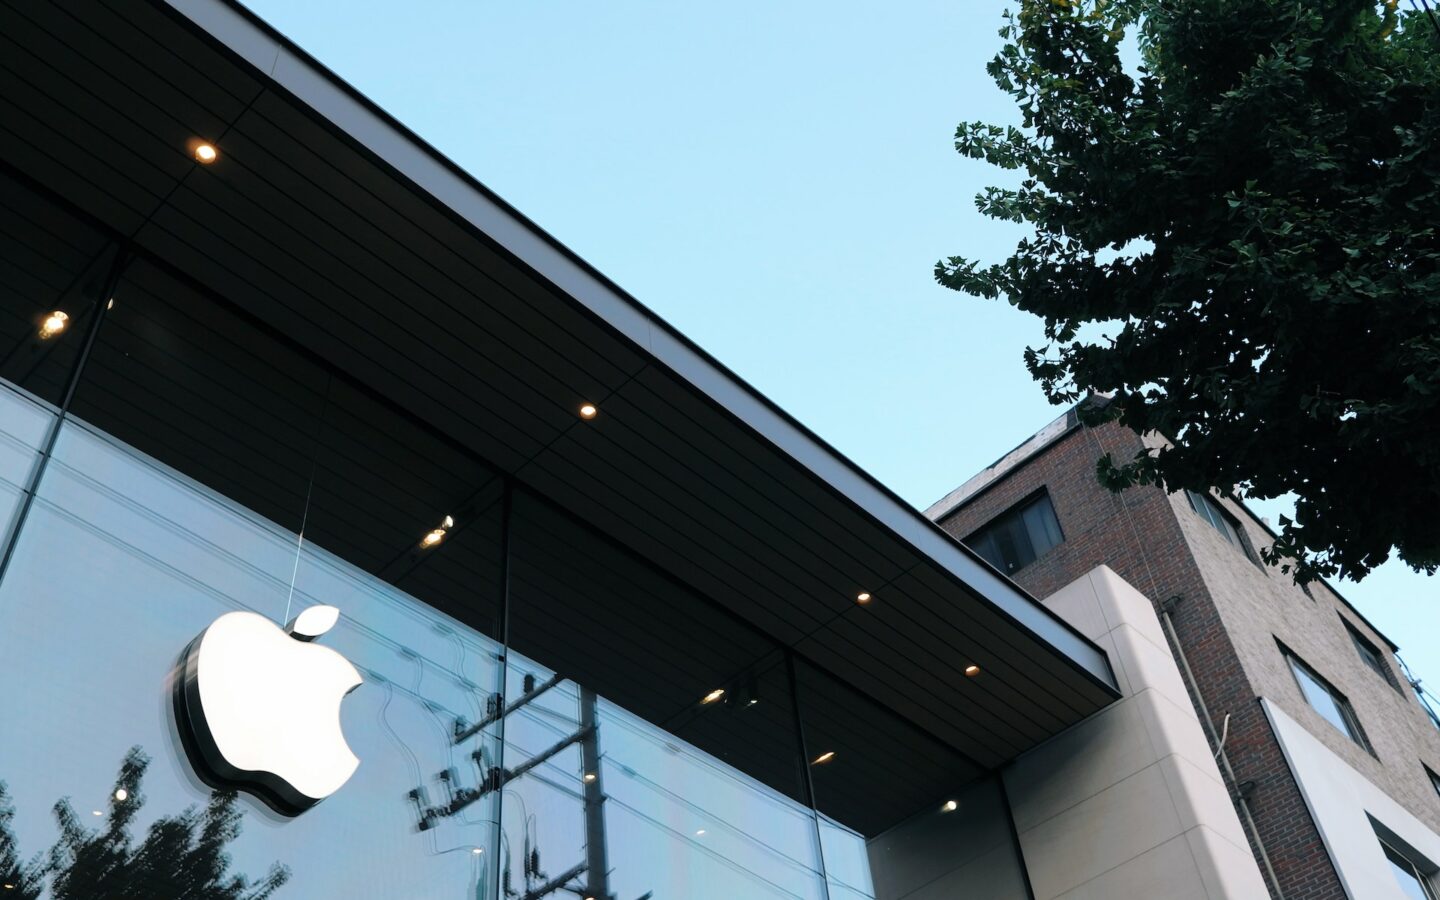 Apple may return to AirPort network equipment and is working on Time Machine with iCloud integration